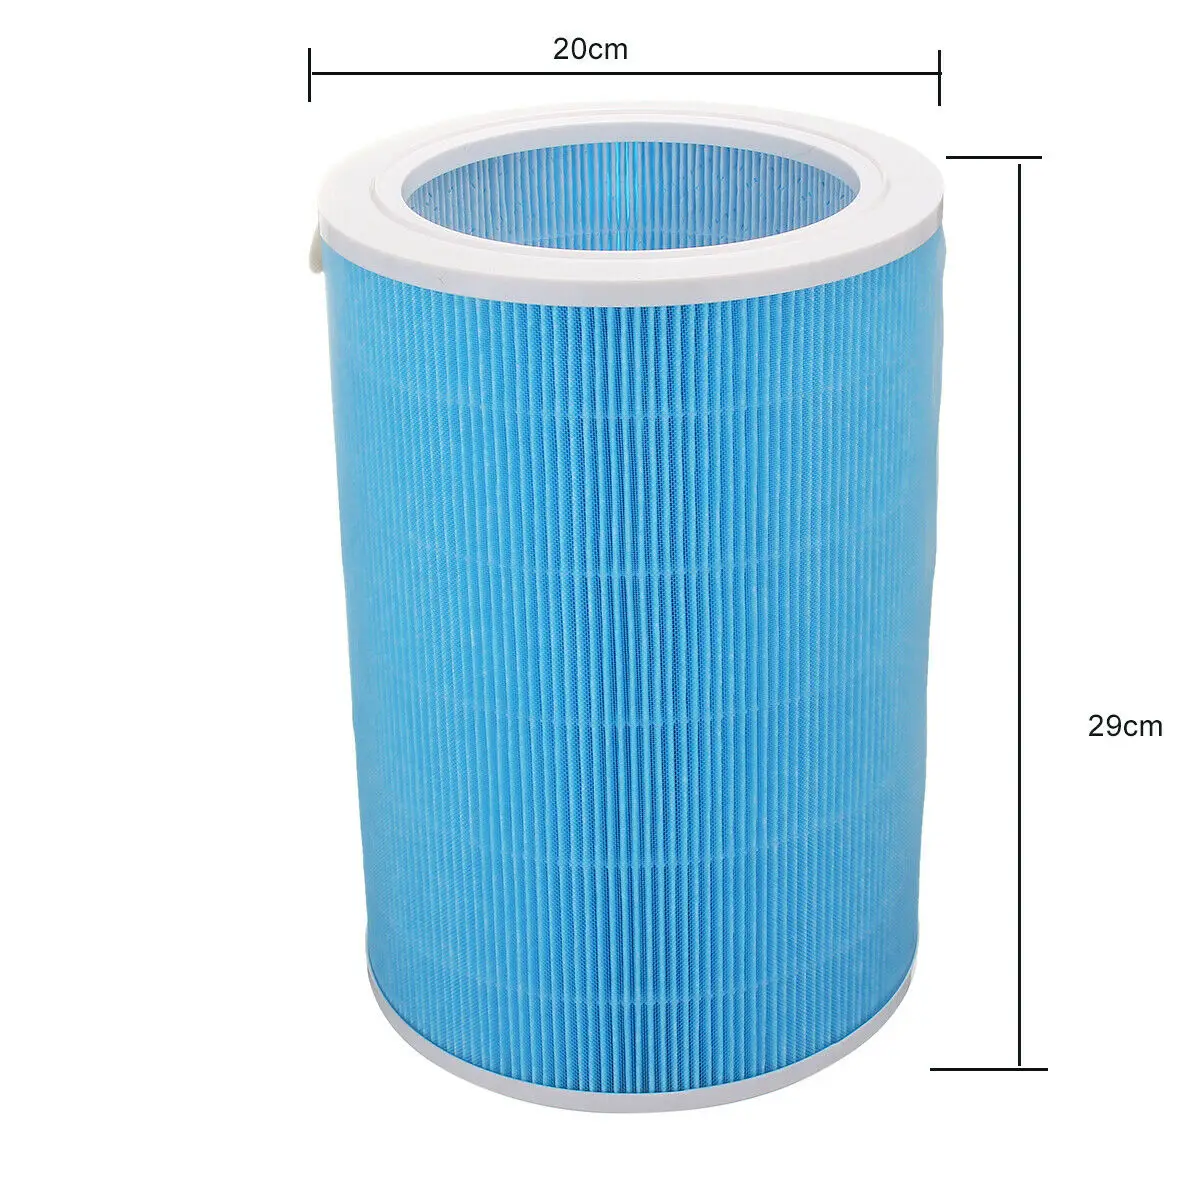 Cleaner Removal Filter For Xiaomi Mi Smart Air Purifier Pro 2S Home Improvement Home Garden Supplies